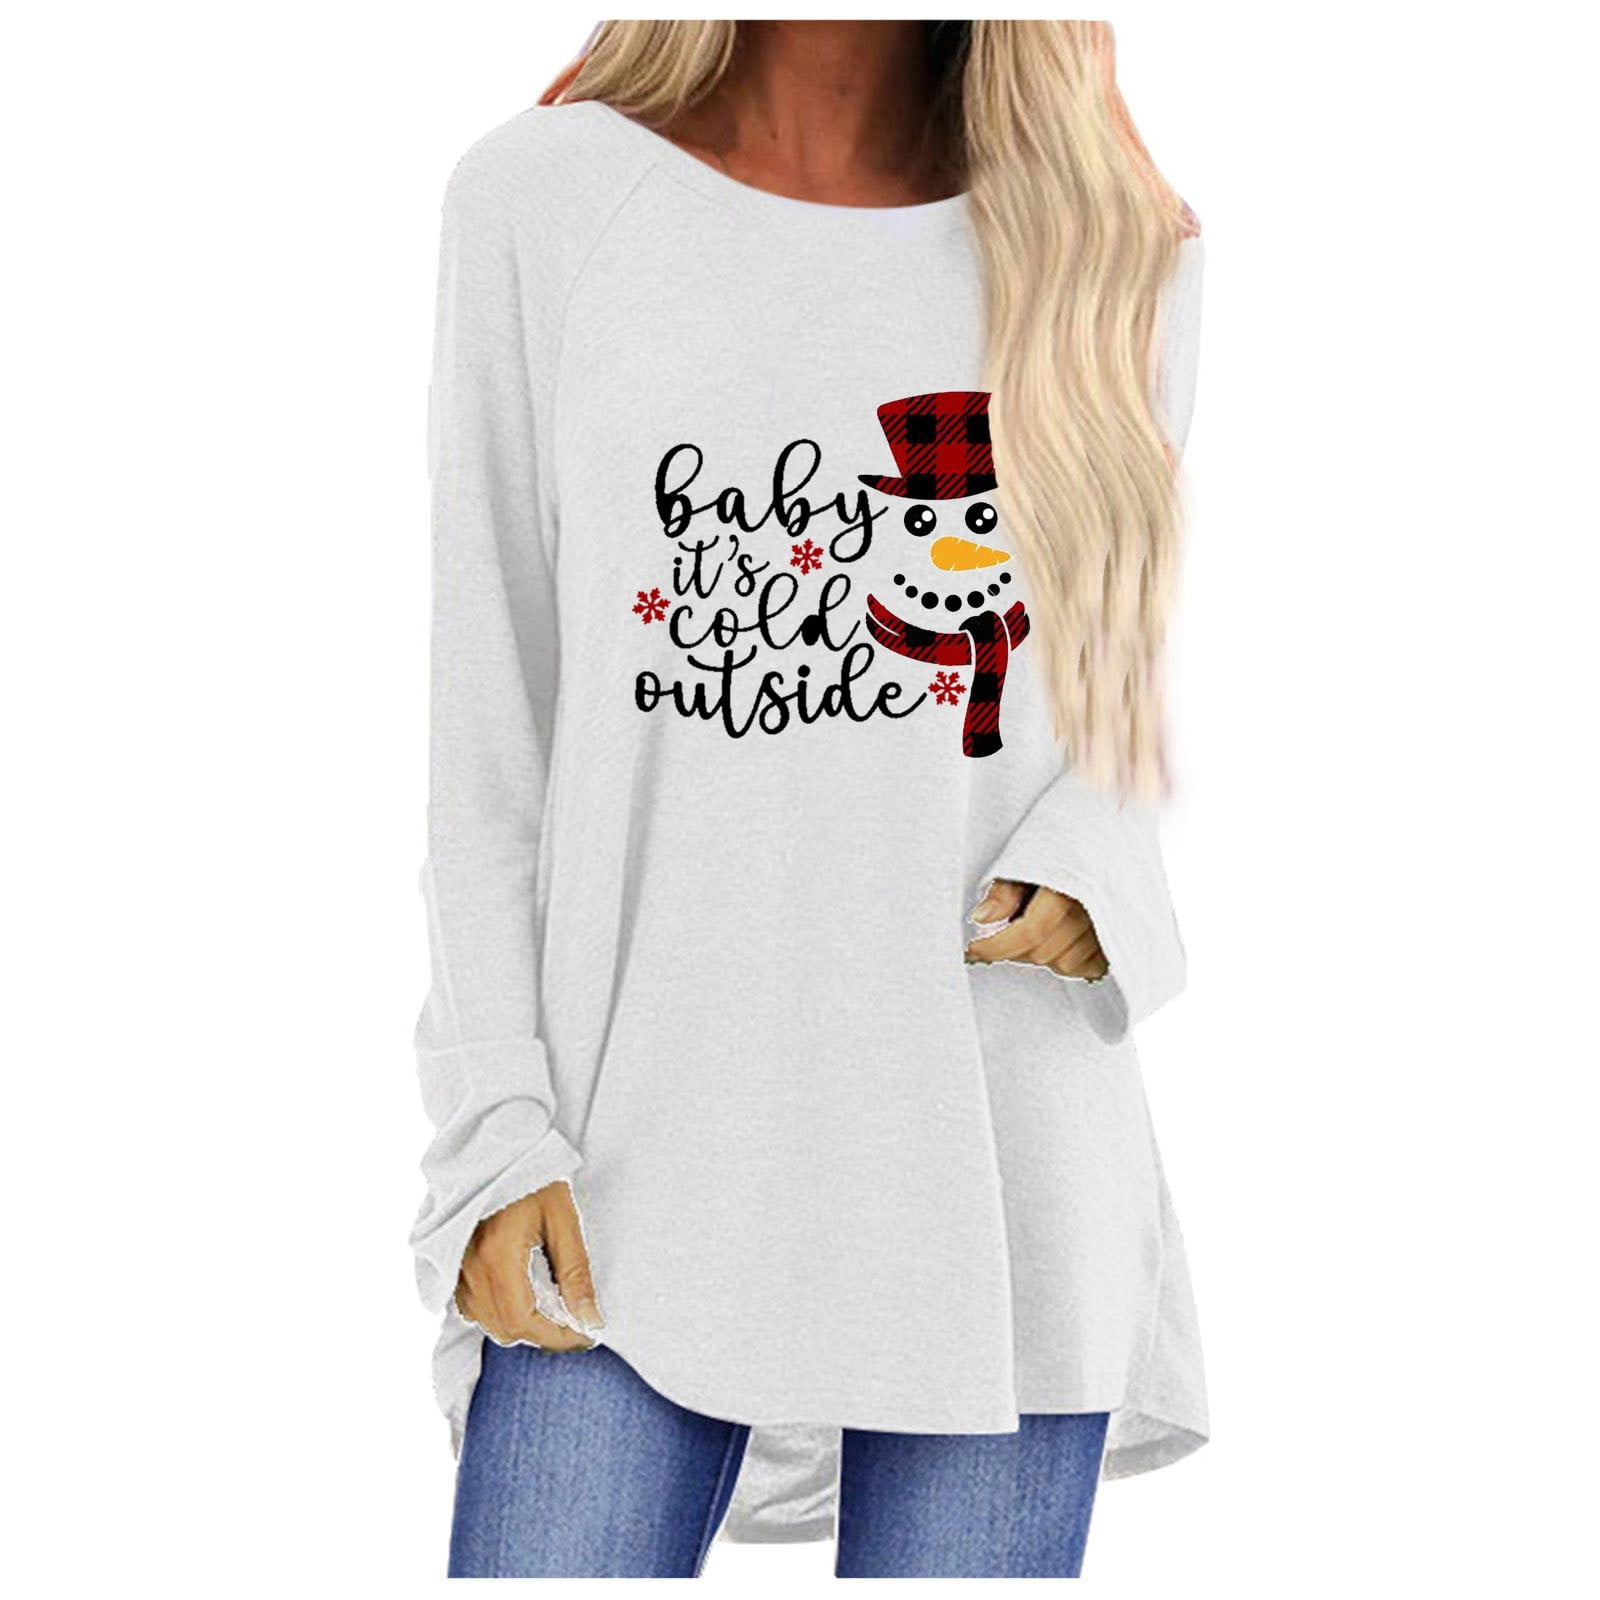 Younthone Christmas Sweatshirt for Women Casual Long Sleeve Splicing Shirts Tops Loose T-Shirt Christmas Party Costume Everyday Blouse UK Size 10-18 